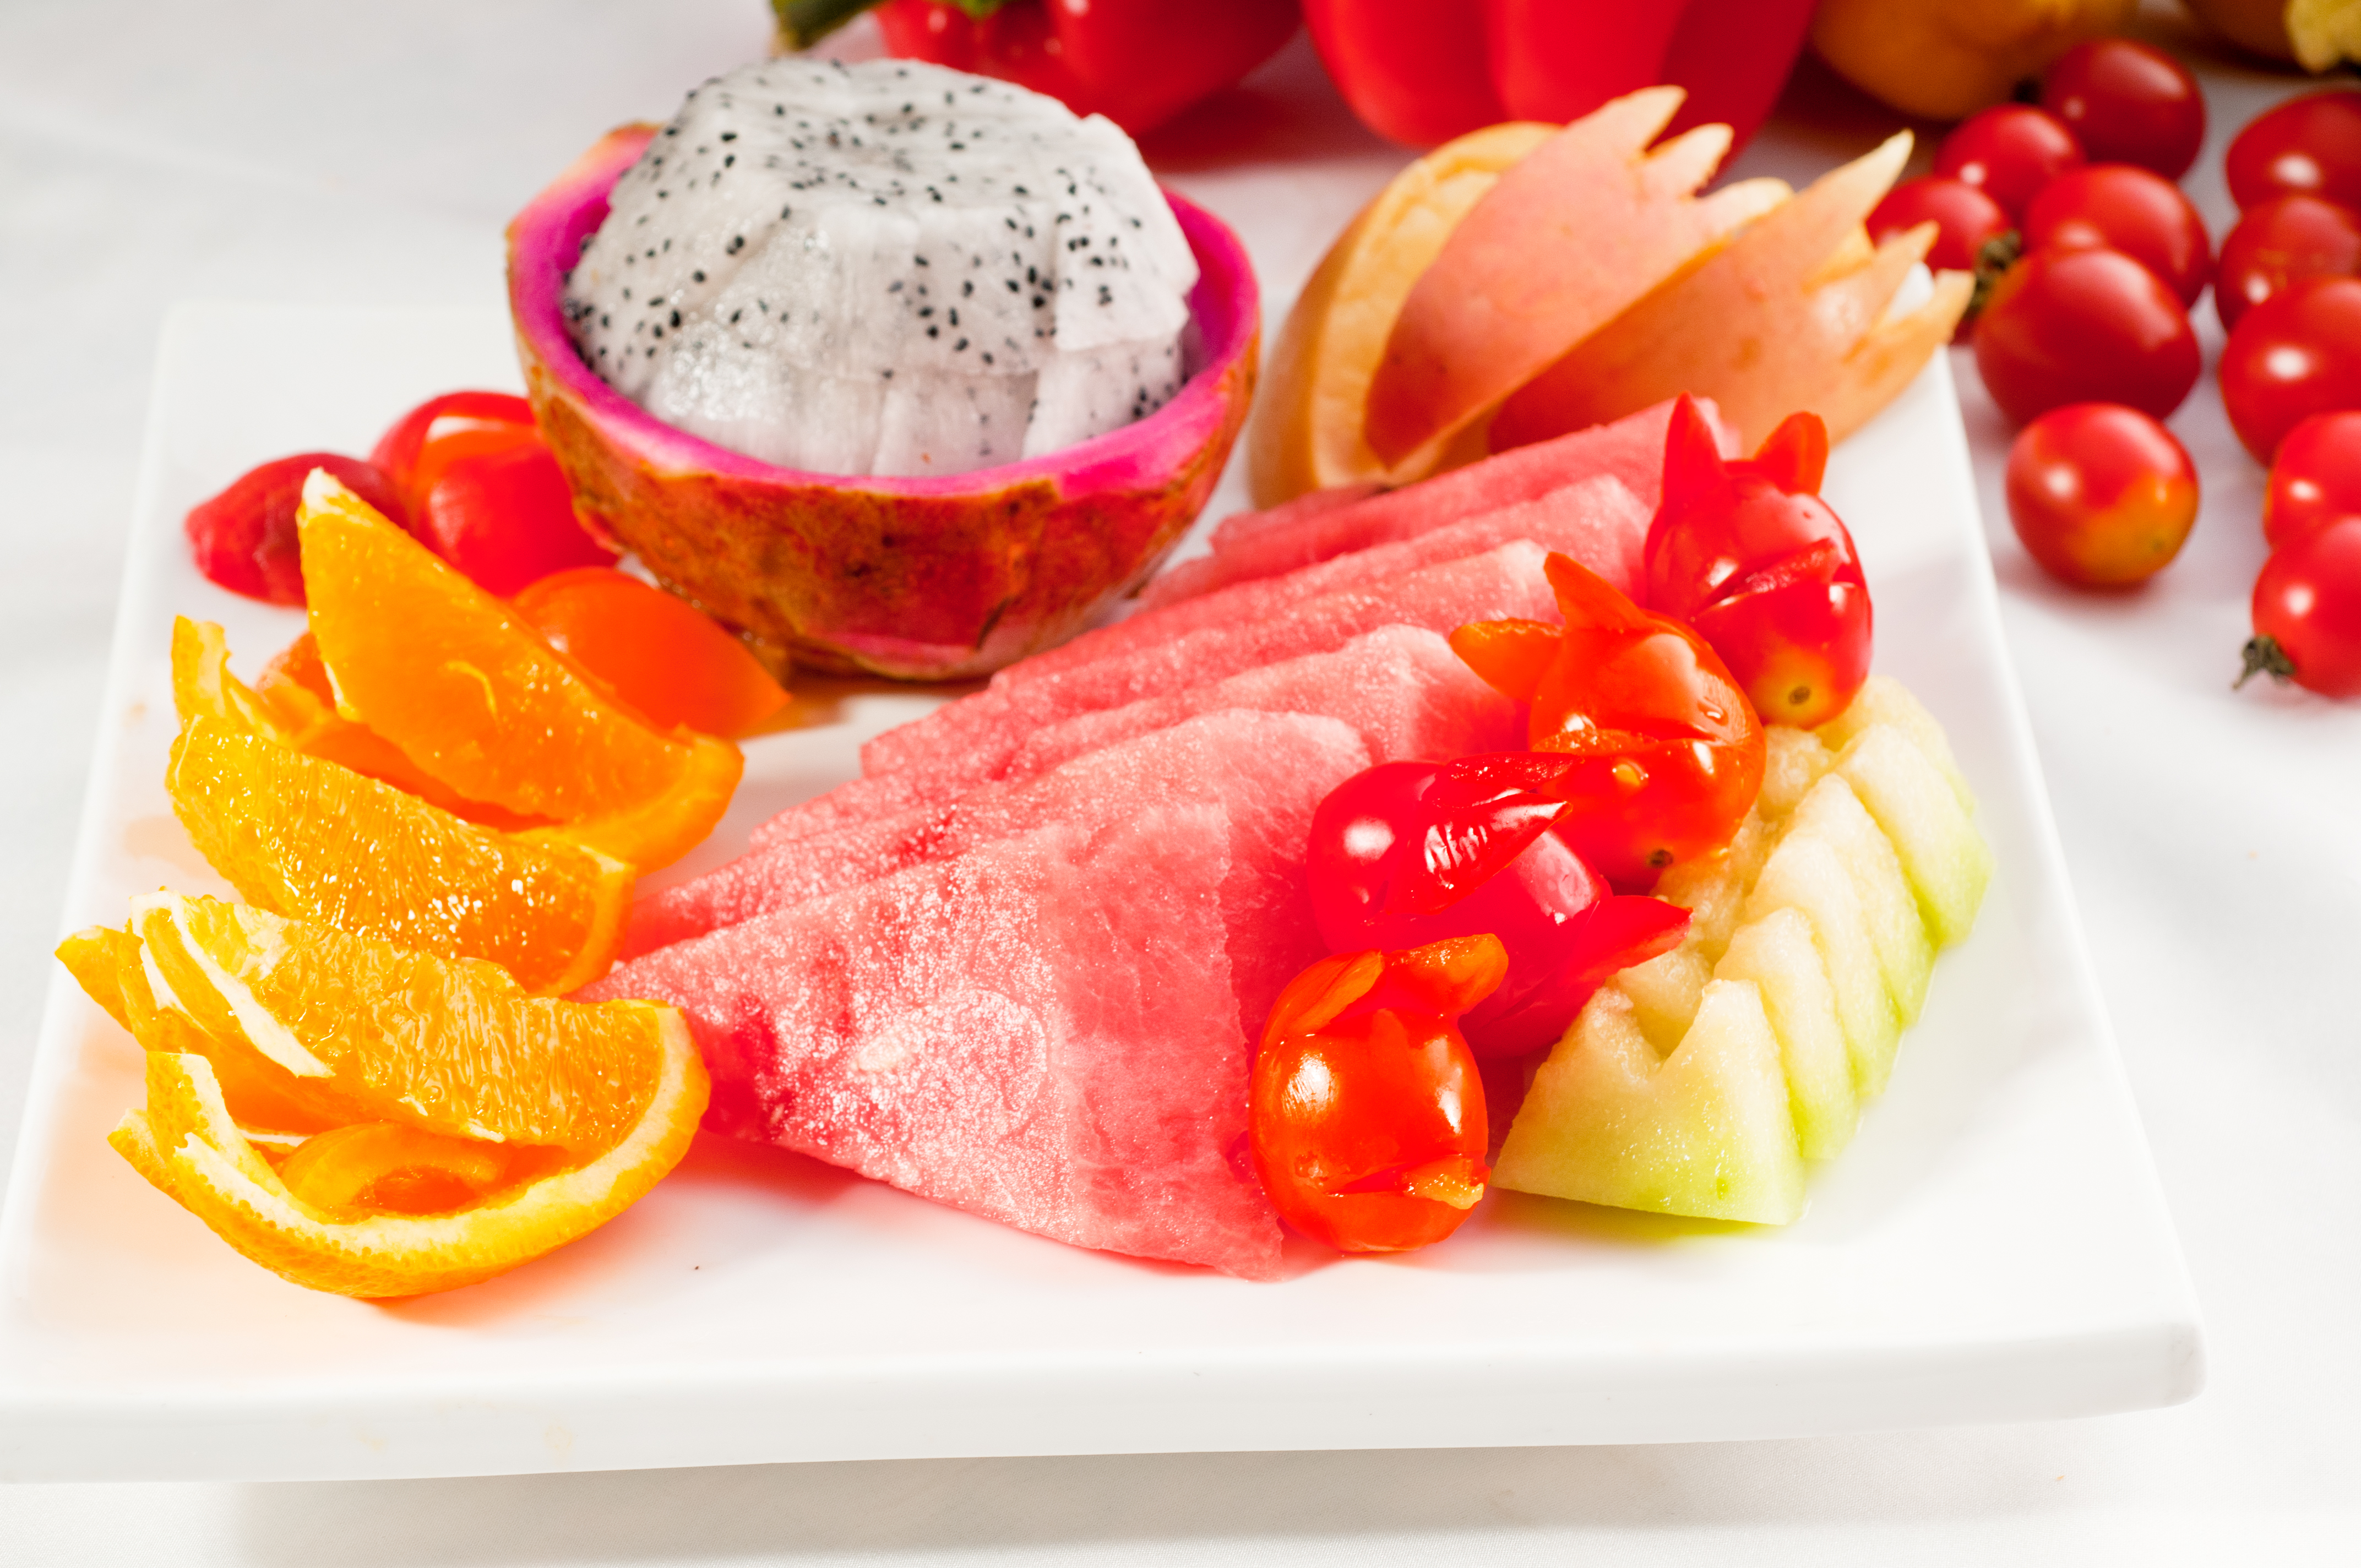 Try indulging in a fruit platter the next time you’re craving for something sweet